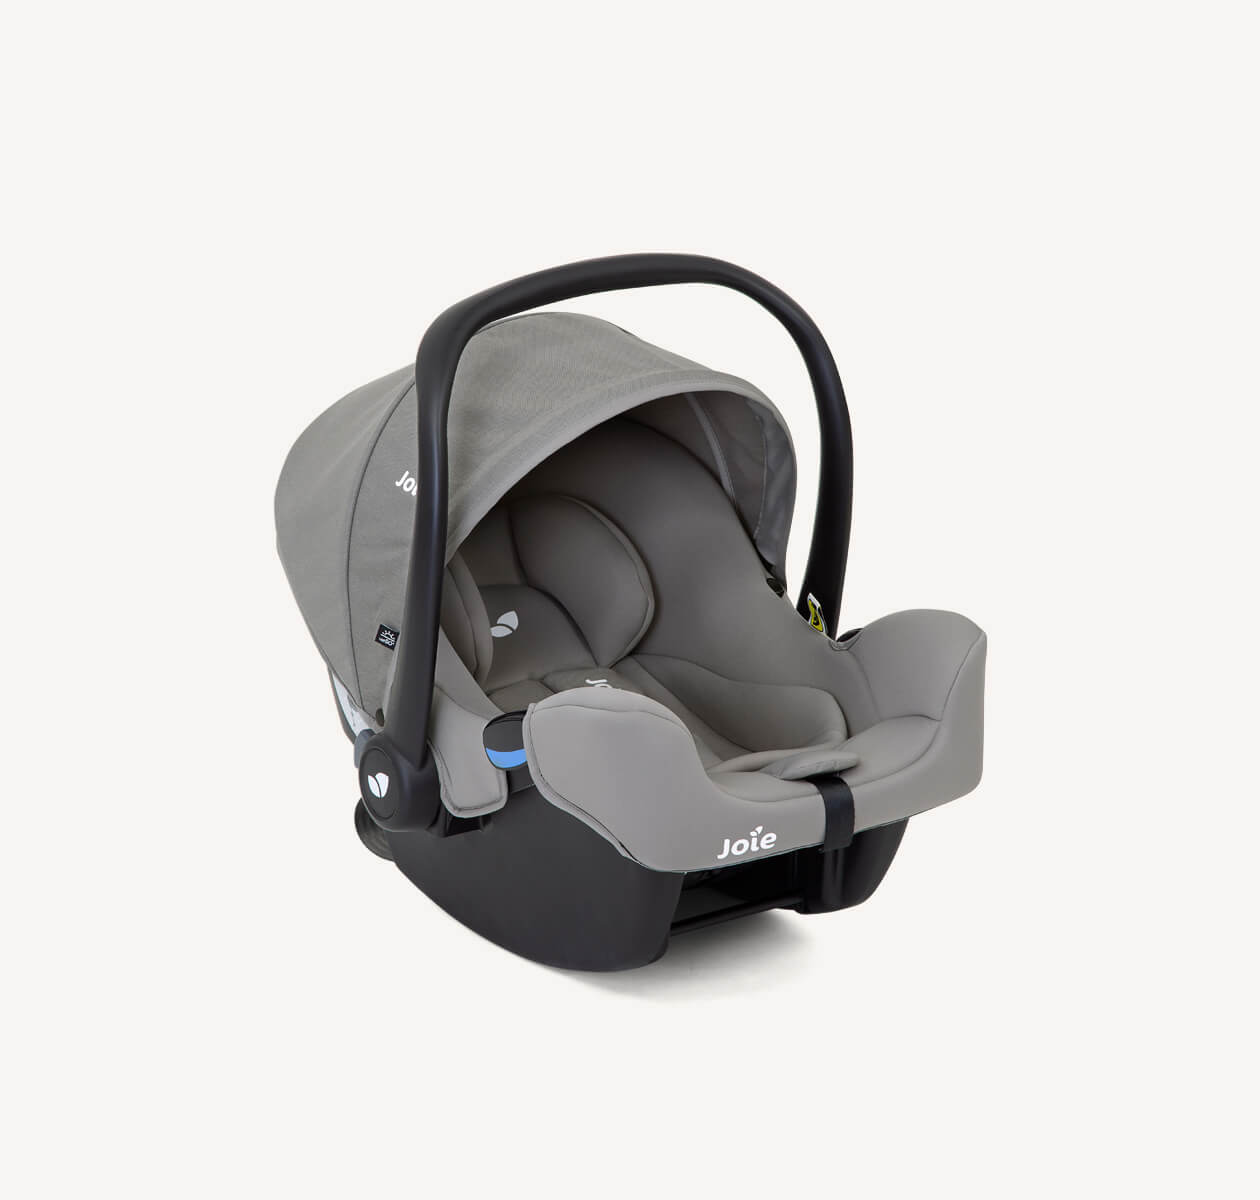 Joie I-snug infant car seat in a grey colour with canopy and handle up on a right-angle position.